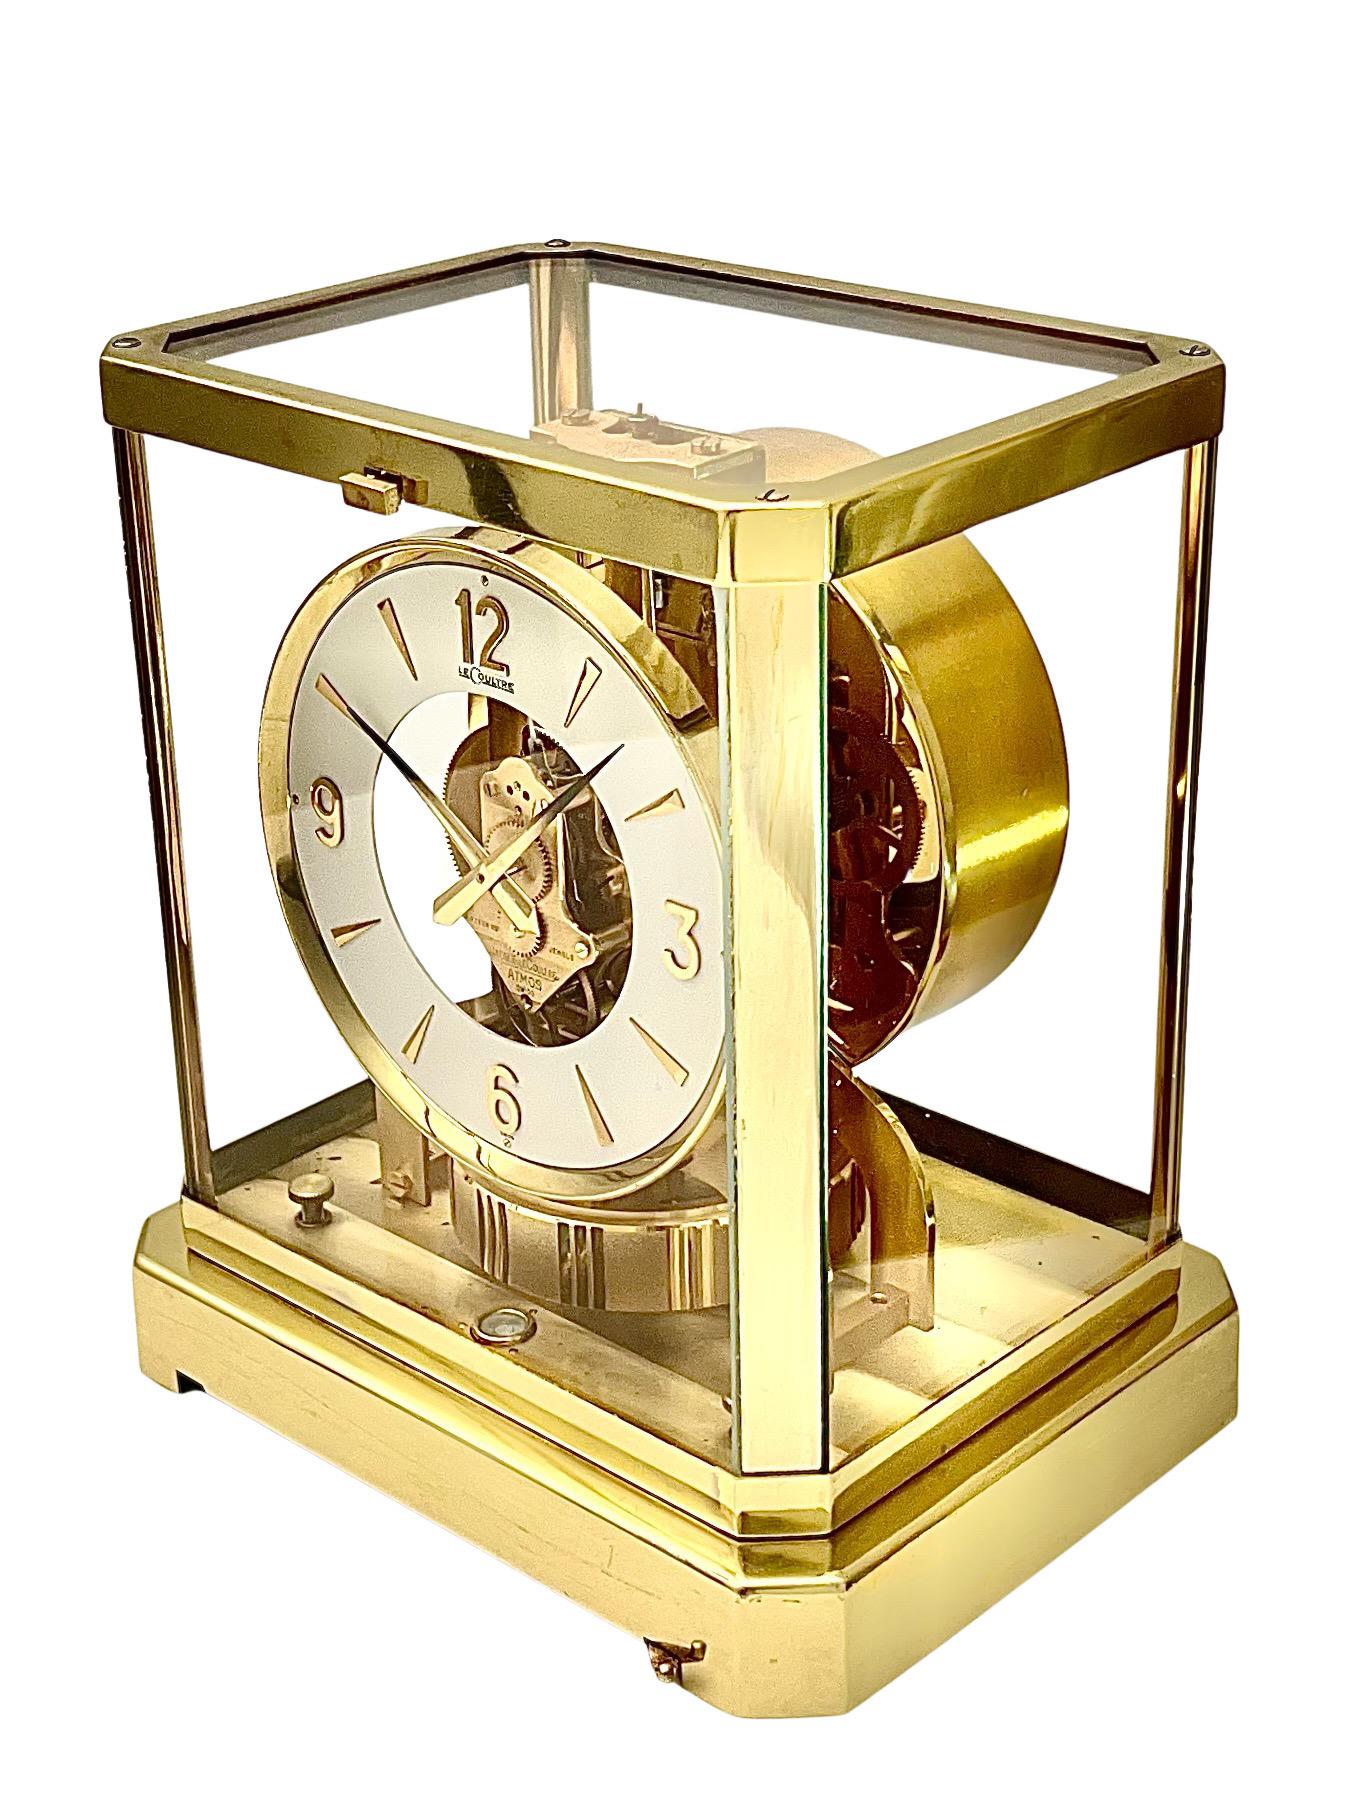 A stunning Mid Century Jaeger LeCoultre Atmos clock, model 528-8 with circular dial and Arabic numerals. In its glass case, the Atmos clock’s unique design allows the owner to see the complexity of the machinery from all angles. As with all Atmos